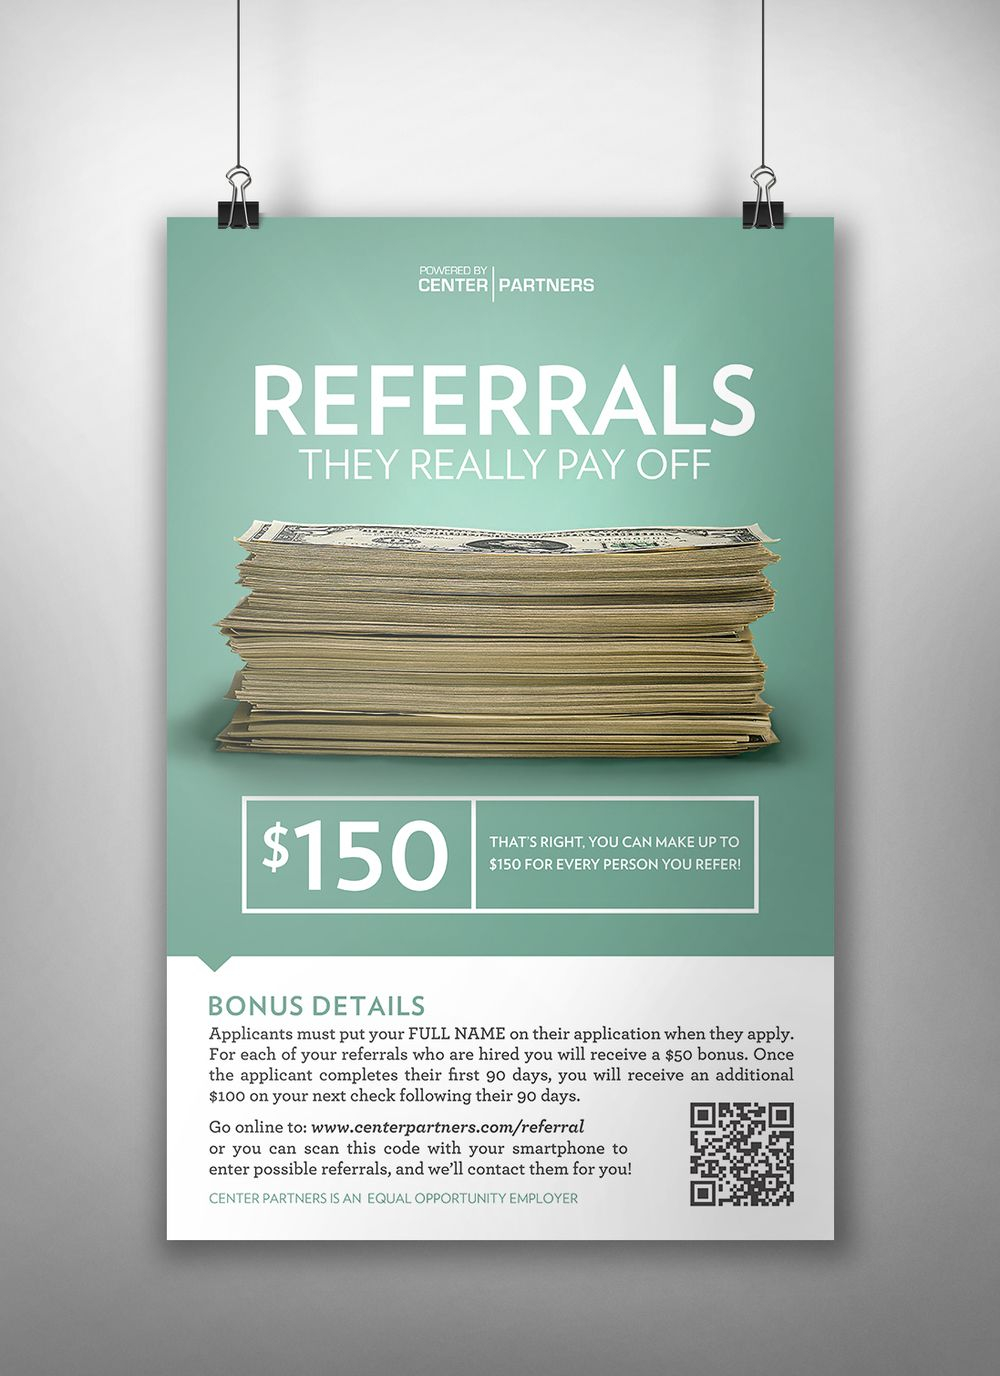 Sample Employee Referral Flyers - Vtwctr With Referral Bonus Flyer Template In Referral Bonus Flyer Template